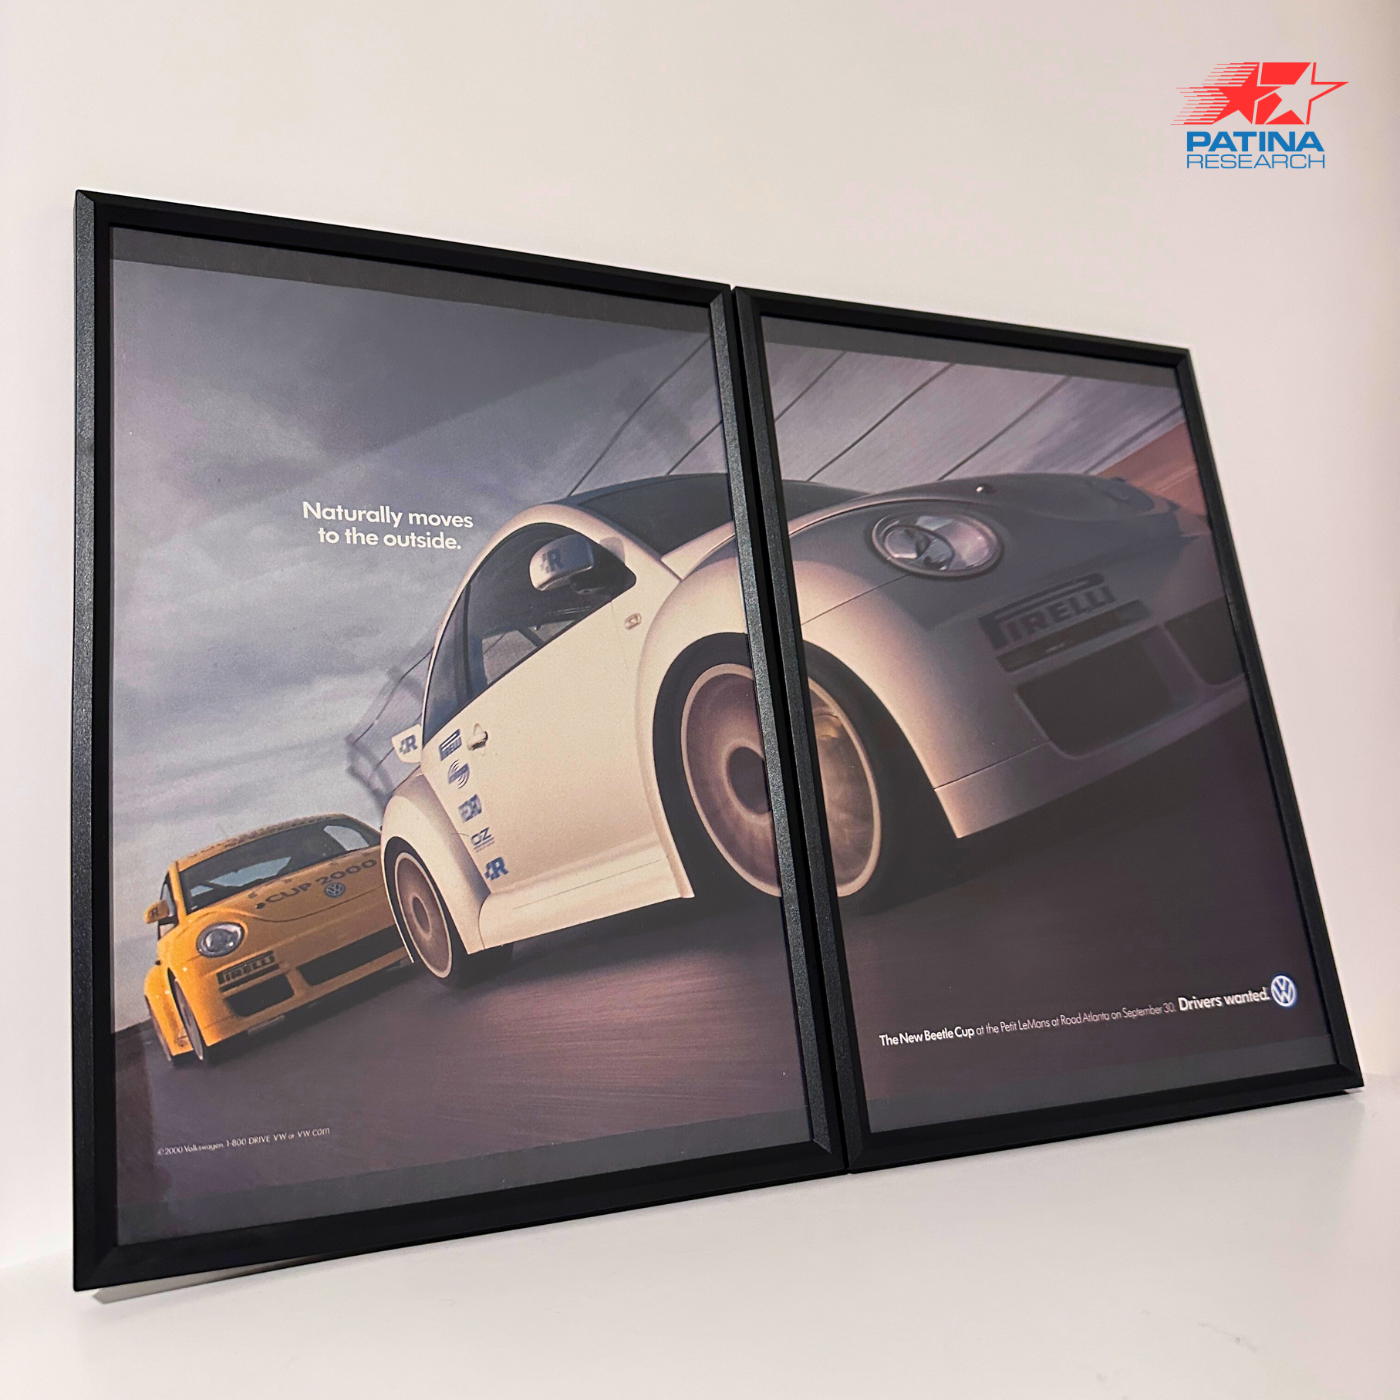 Volkswagen Beetle Naturally moves framed ad